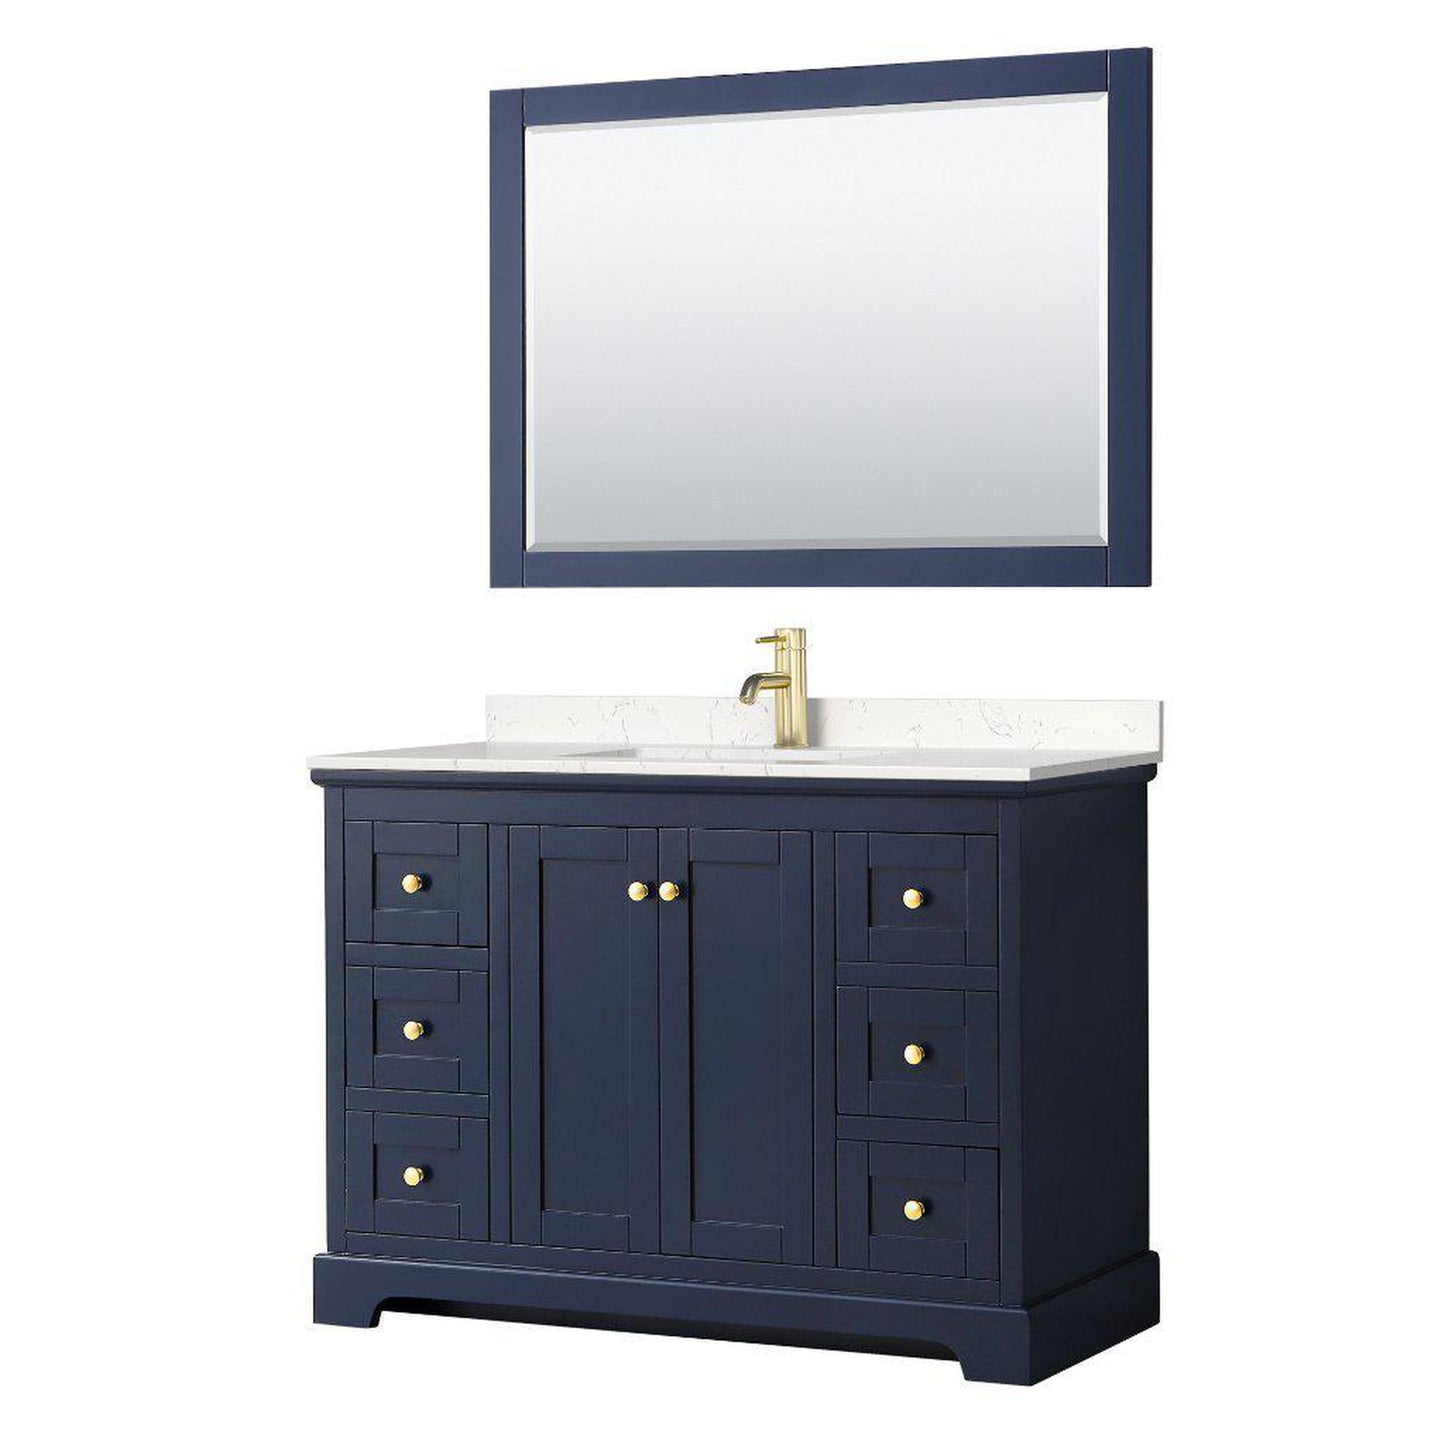 Wyndham Collection Avery 48" Dark Blue Single Bathroom Vanity Set With Light-Vein Cultured Marble Countertop With 1-Hole Faucet And Square Sink And 46" Mirror